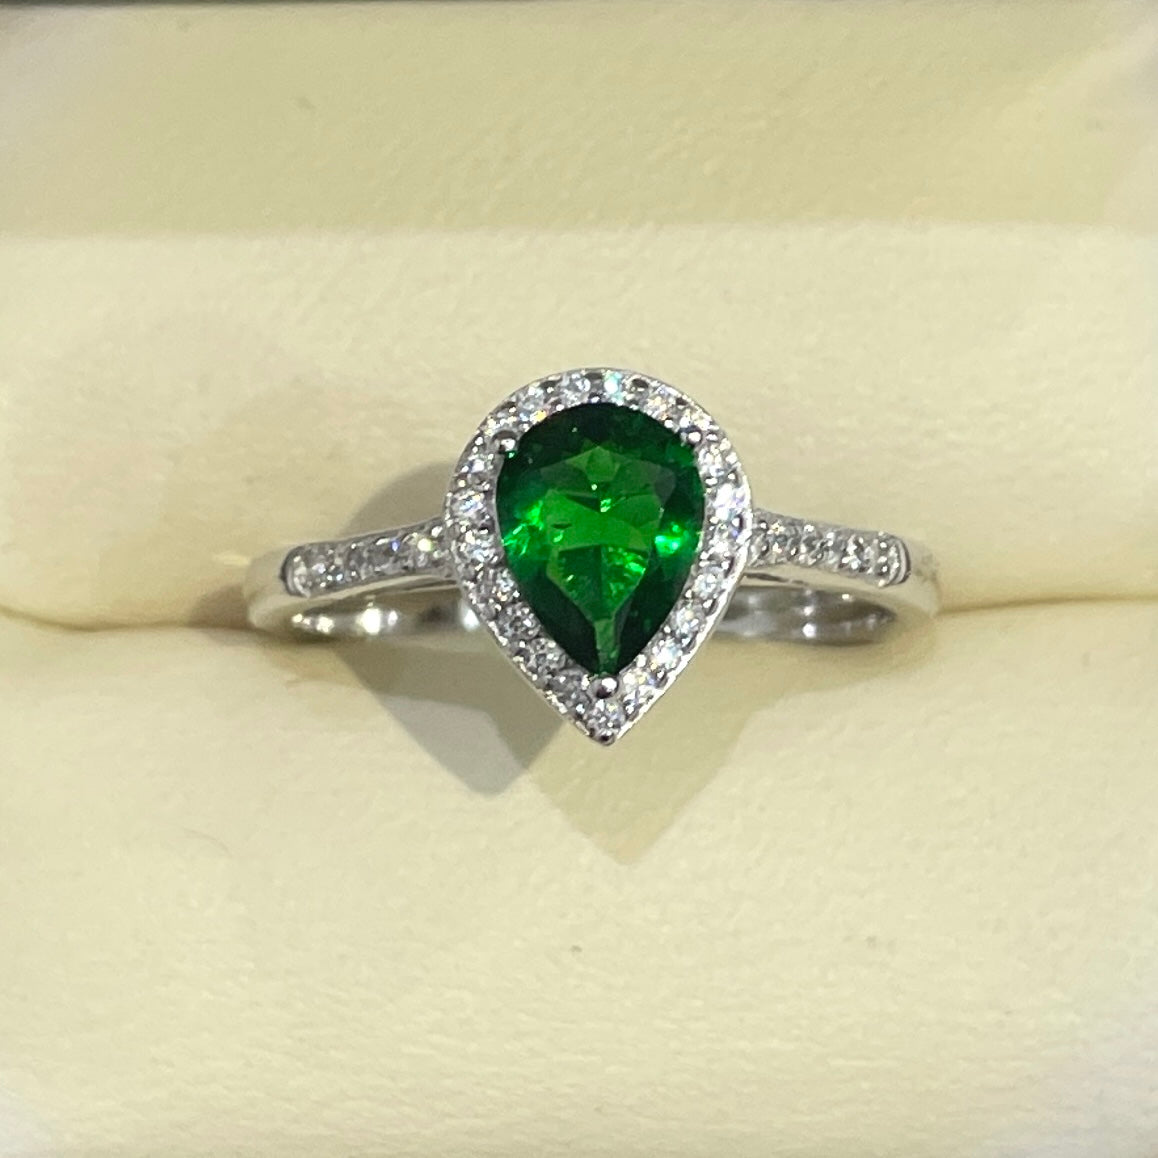 Large deep bright emerald and white cubic zirconia oval cluster dress cocktail ring